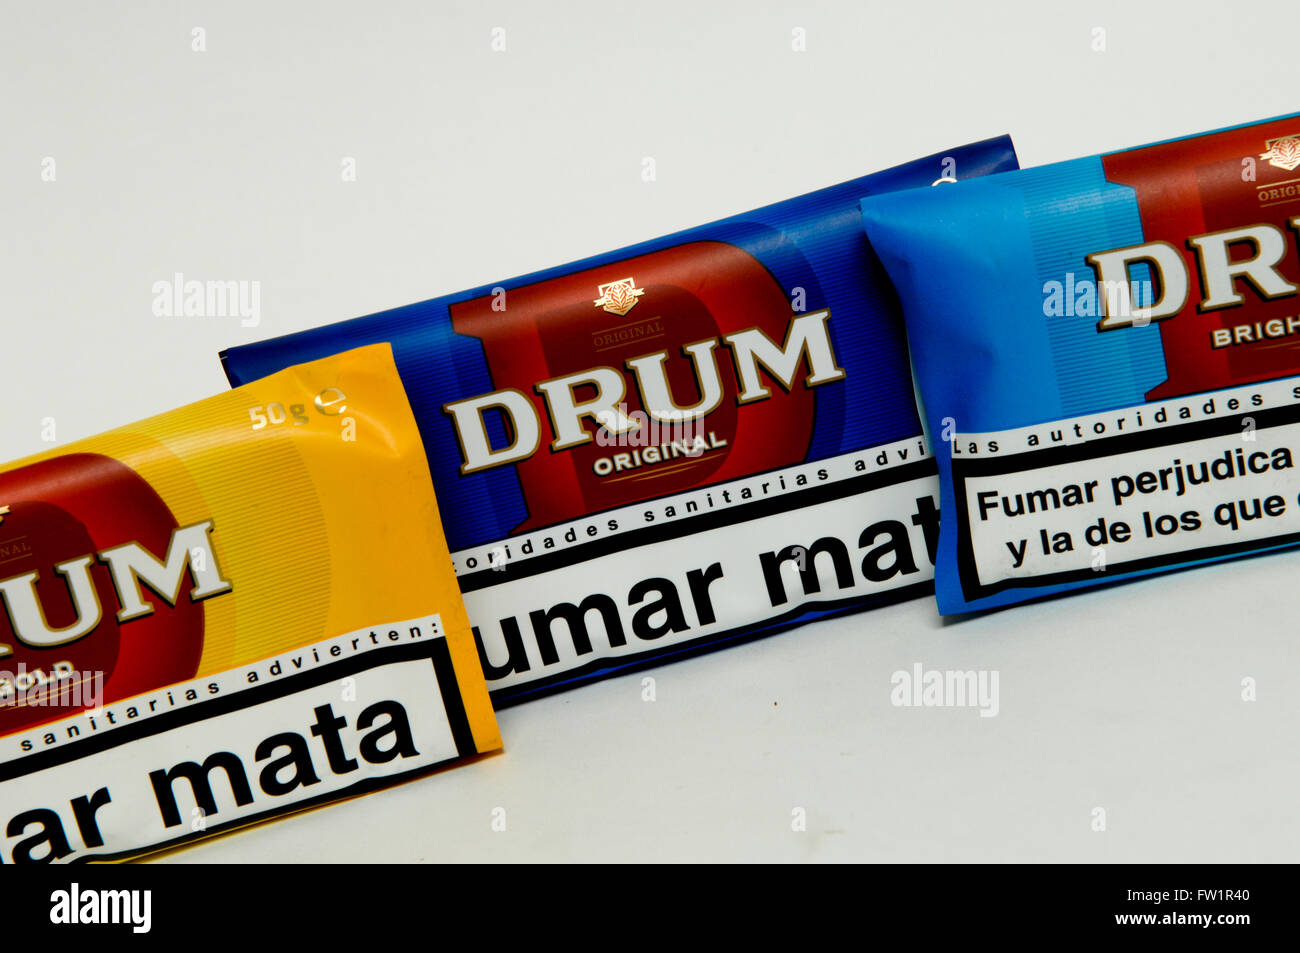 Selection of Drum Original Hand Rolling Tobacco Stock Photo - Alamy